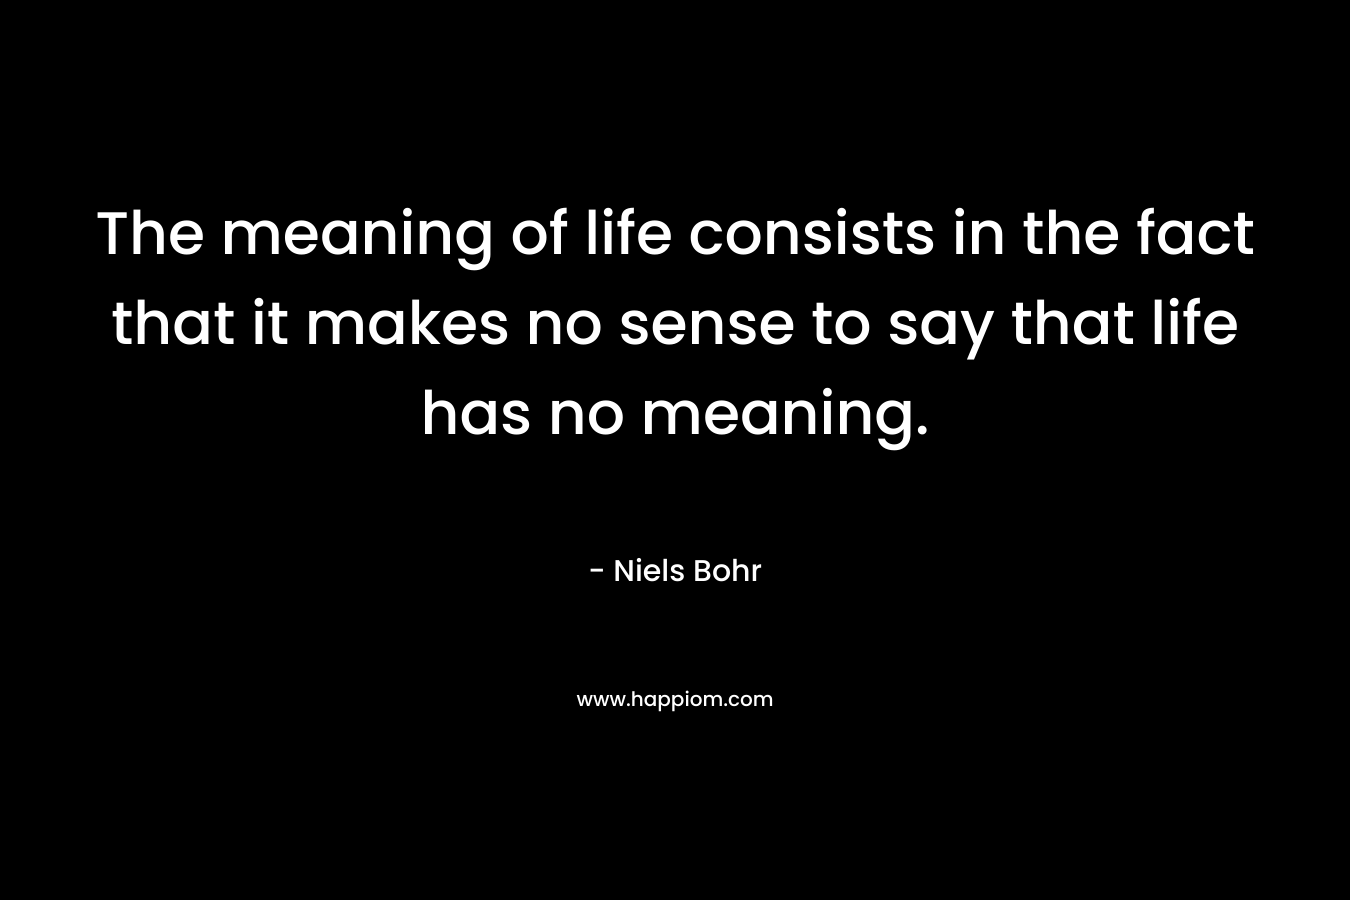 The meaning of life consists in the fact that it makes no sense to say that life has no meaning.